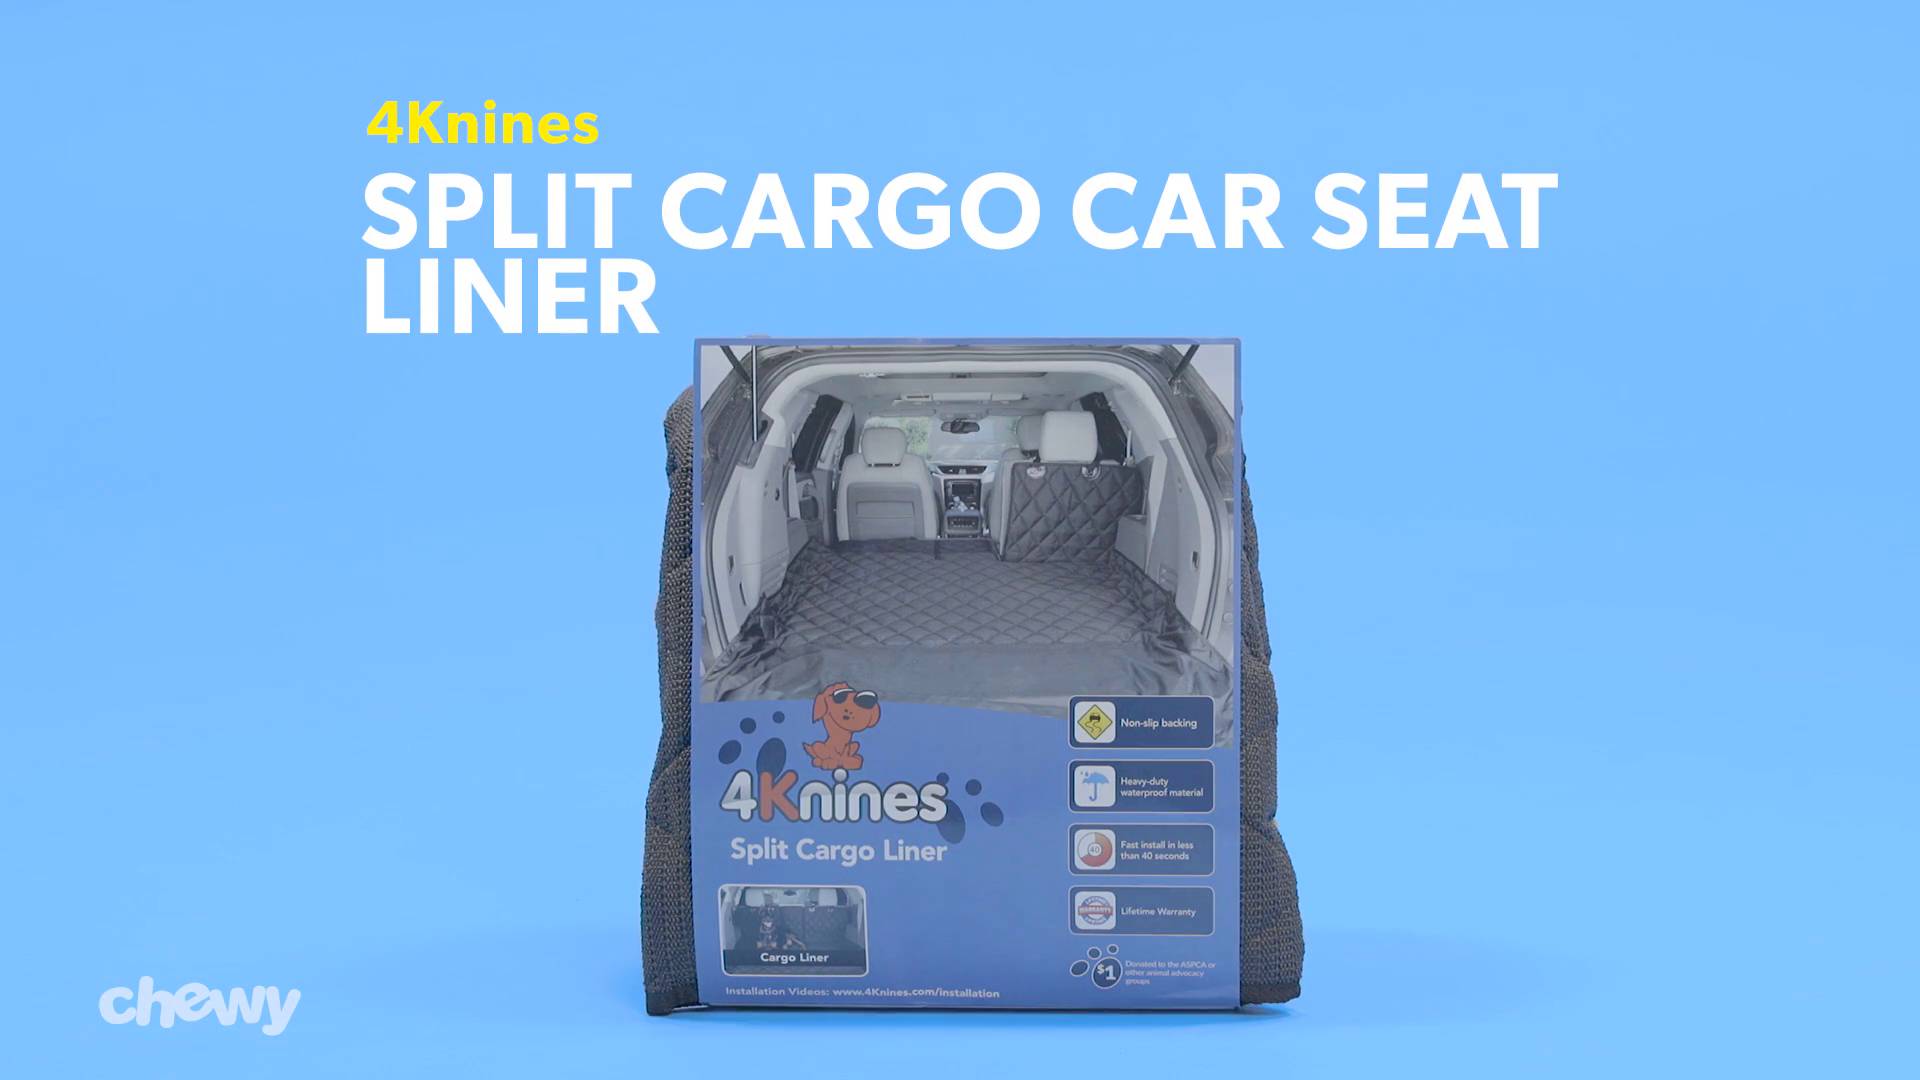 4KNINES Split Cargo Car Seat Liner, Large - Chewy.com